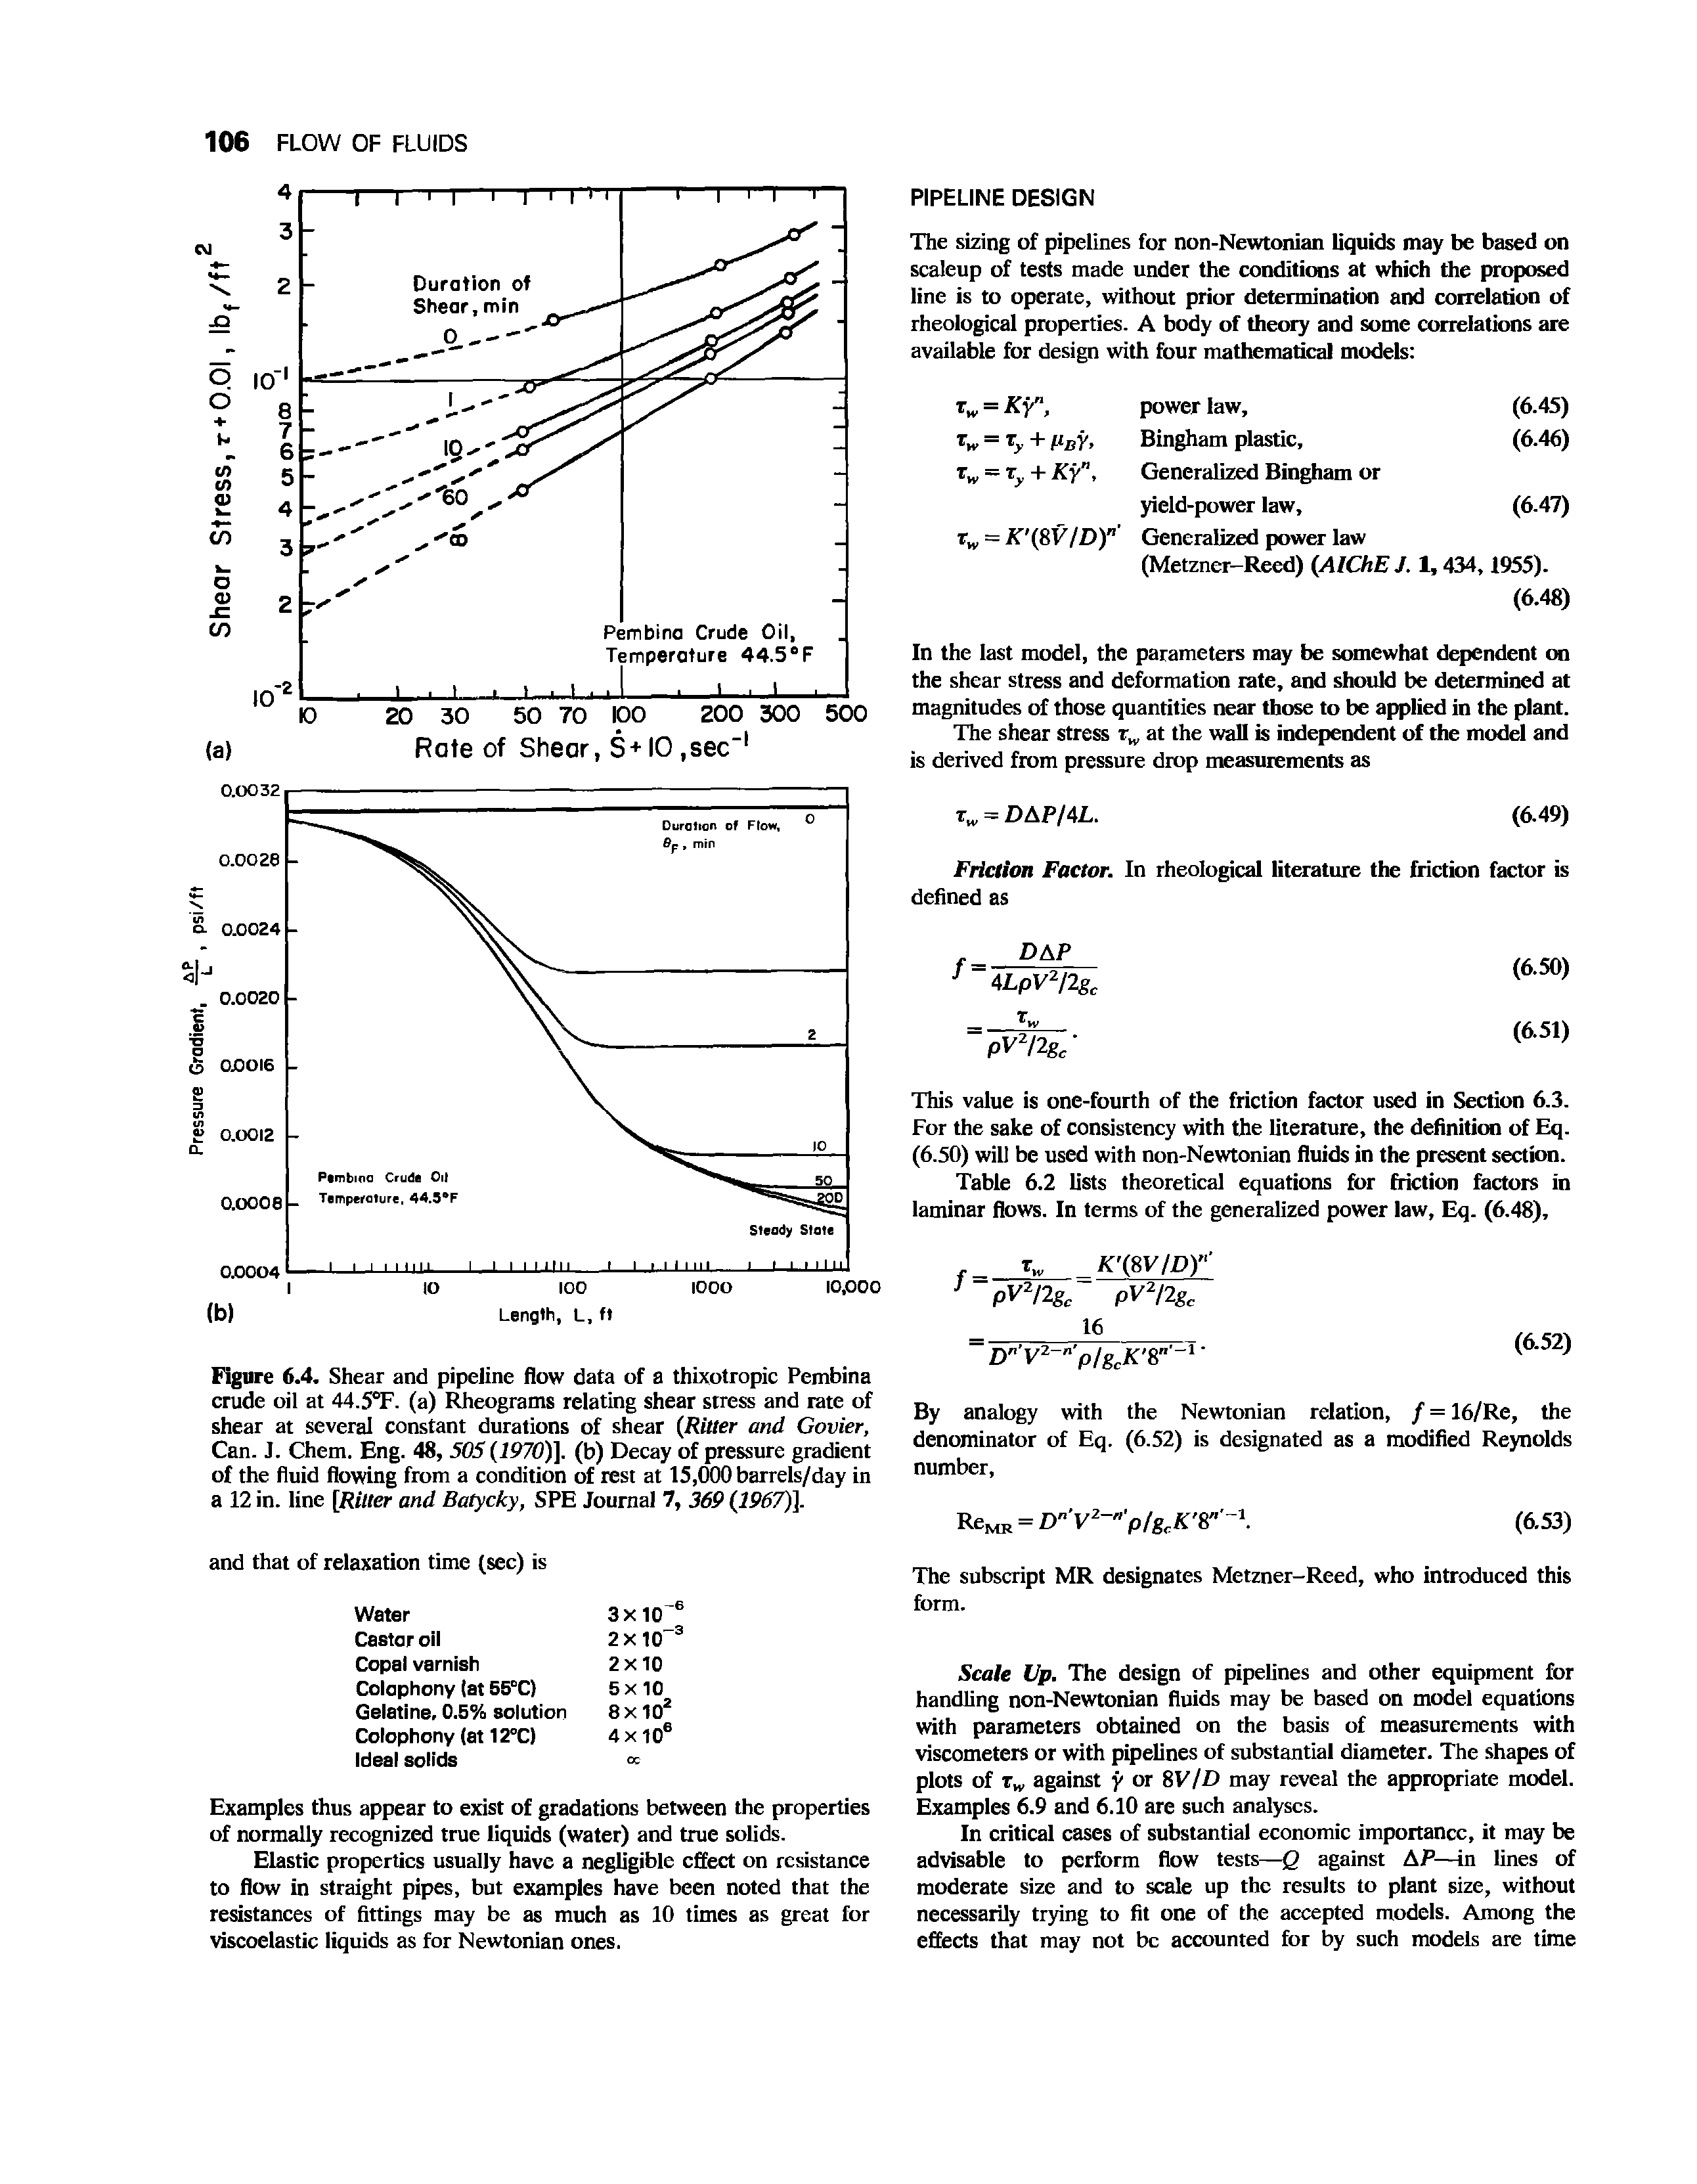 Figure 6.4. Shear and pipeline flow data of a thixotropic Pembina crude oil at 44.5°F. (a) Rheograms relating shear stress and rate of shear at several constant durations of shear (Ritter and Govier, Can. J. Chem. Eng. 48, 50S (1970)]. (b) Decay of pressure gradient of the fluid flowing from a condition of rest at 15,000 barrels/day in a 12 in. line [Ritter and Batycky, SPE Journal 7, 369 (1967)].